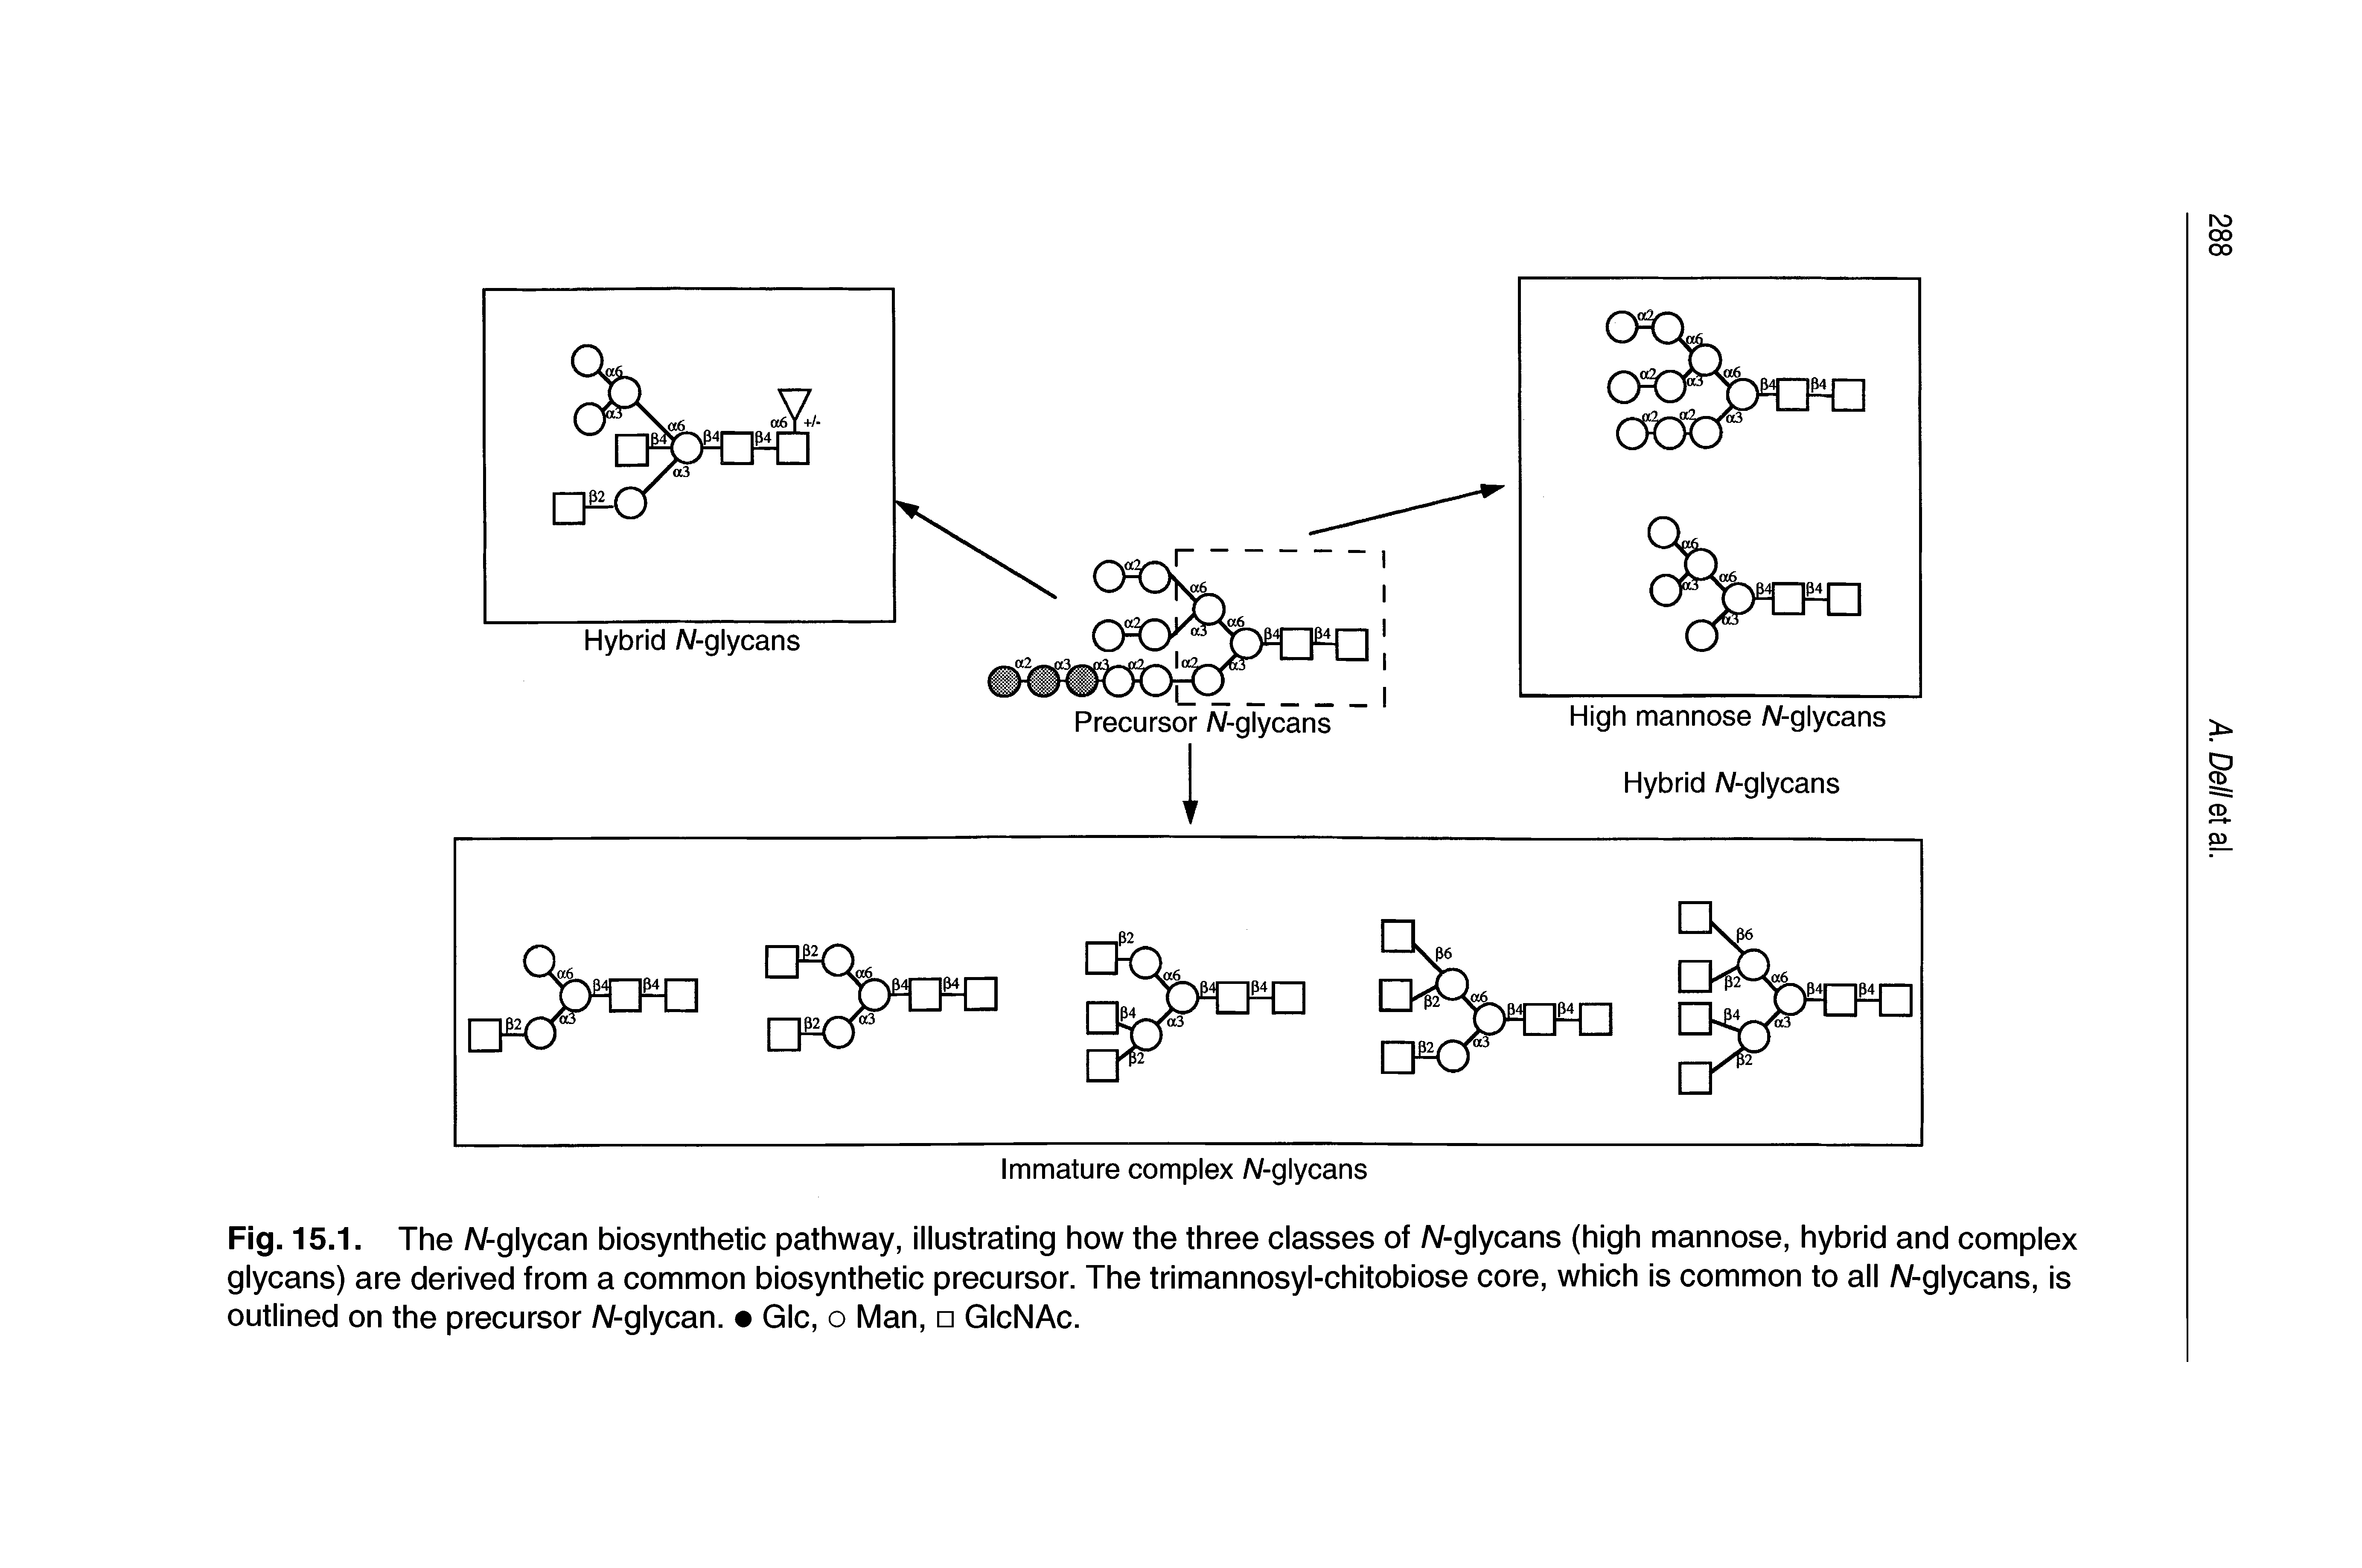 Fig. 15.1. The A/-glycan biosynthetic pathway, illustrating how the three classes of A/-glycans (high mannose, hybrid and complex glycans) are derived from a common biosynthetic precursor. The trimannosyl-chitobiose core, which is common to all A/-glycans, is outlined on the precursor A/-glycan. Glc, o Man, GIcNAc.